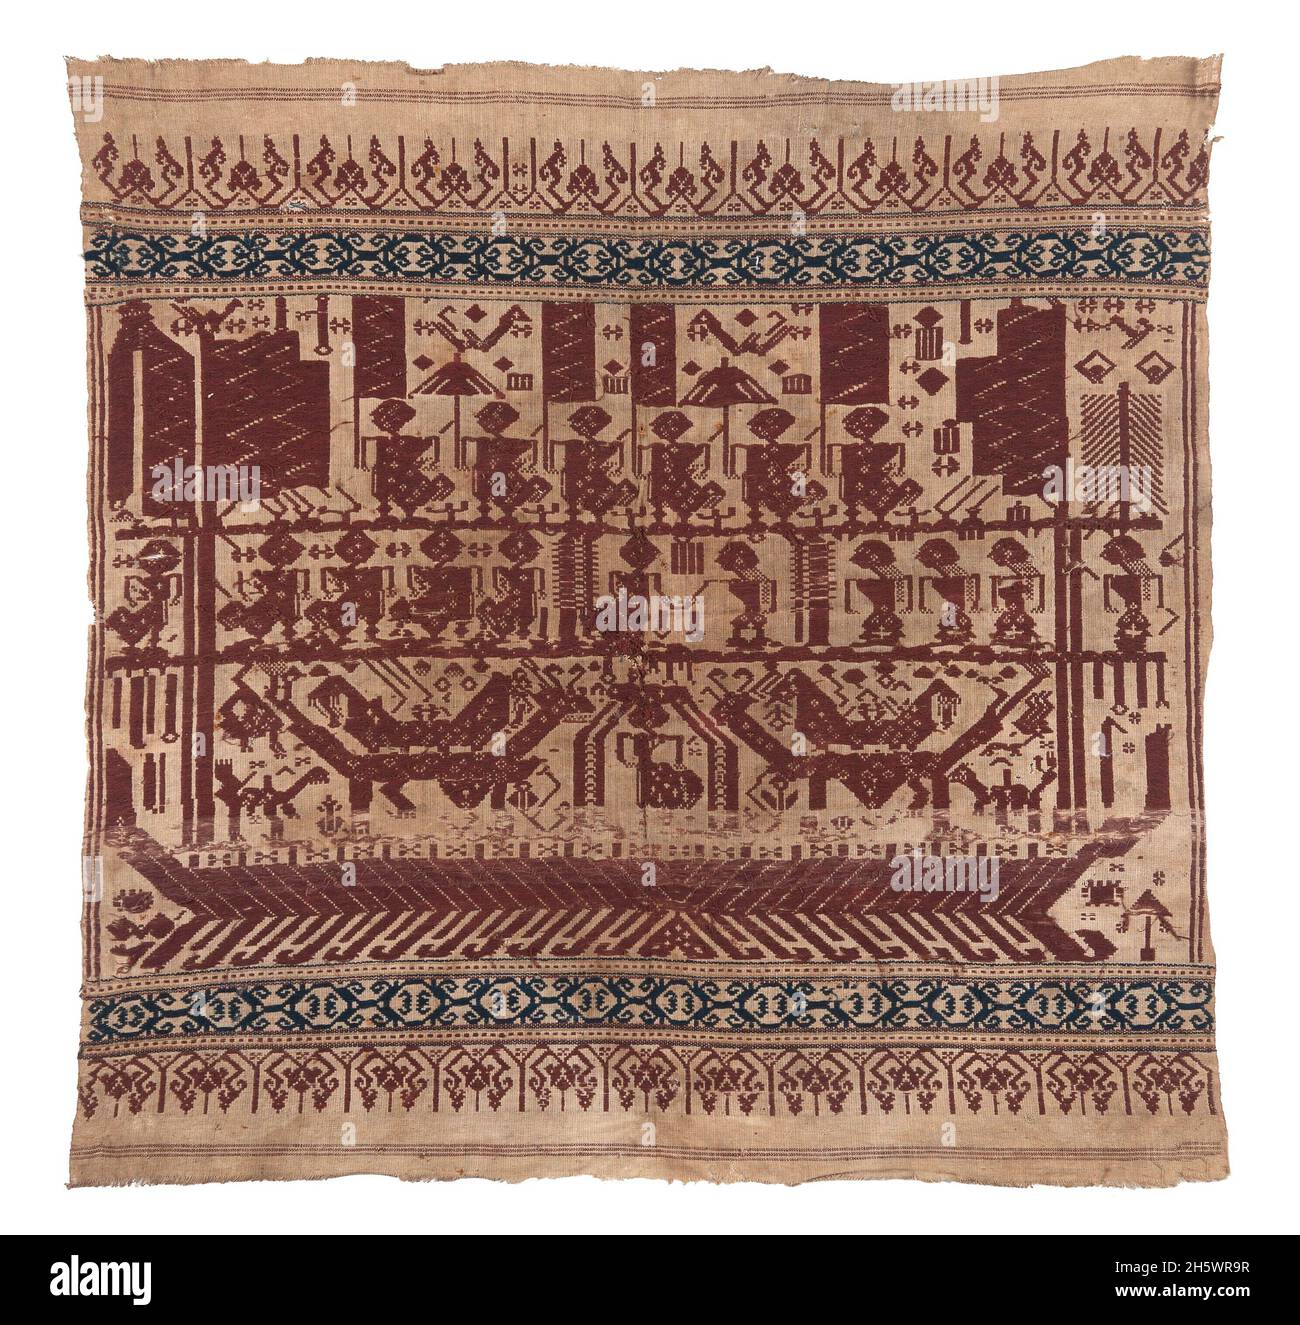 Ceremonial 'shipcloth' textile, C19th, Lampung, Sumatra. Tampan were used for rites of passage ceremonies, as the focal point for ritual meals, the seat for elders overseeing traditional law, and tied to newly-built houses. Examples from the mountainous interior show stylised natural or domestic subjects and geometric designs, while those from the coast (tampan pasisir) display richly detailed scenes of ships and other motifs. The ship, the main motif, symbolises movement, appropriate to the rites of passage rituals. Stock Photo